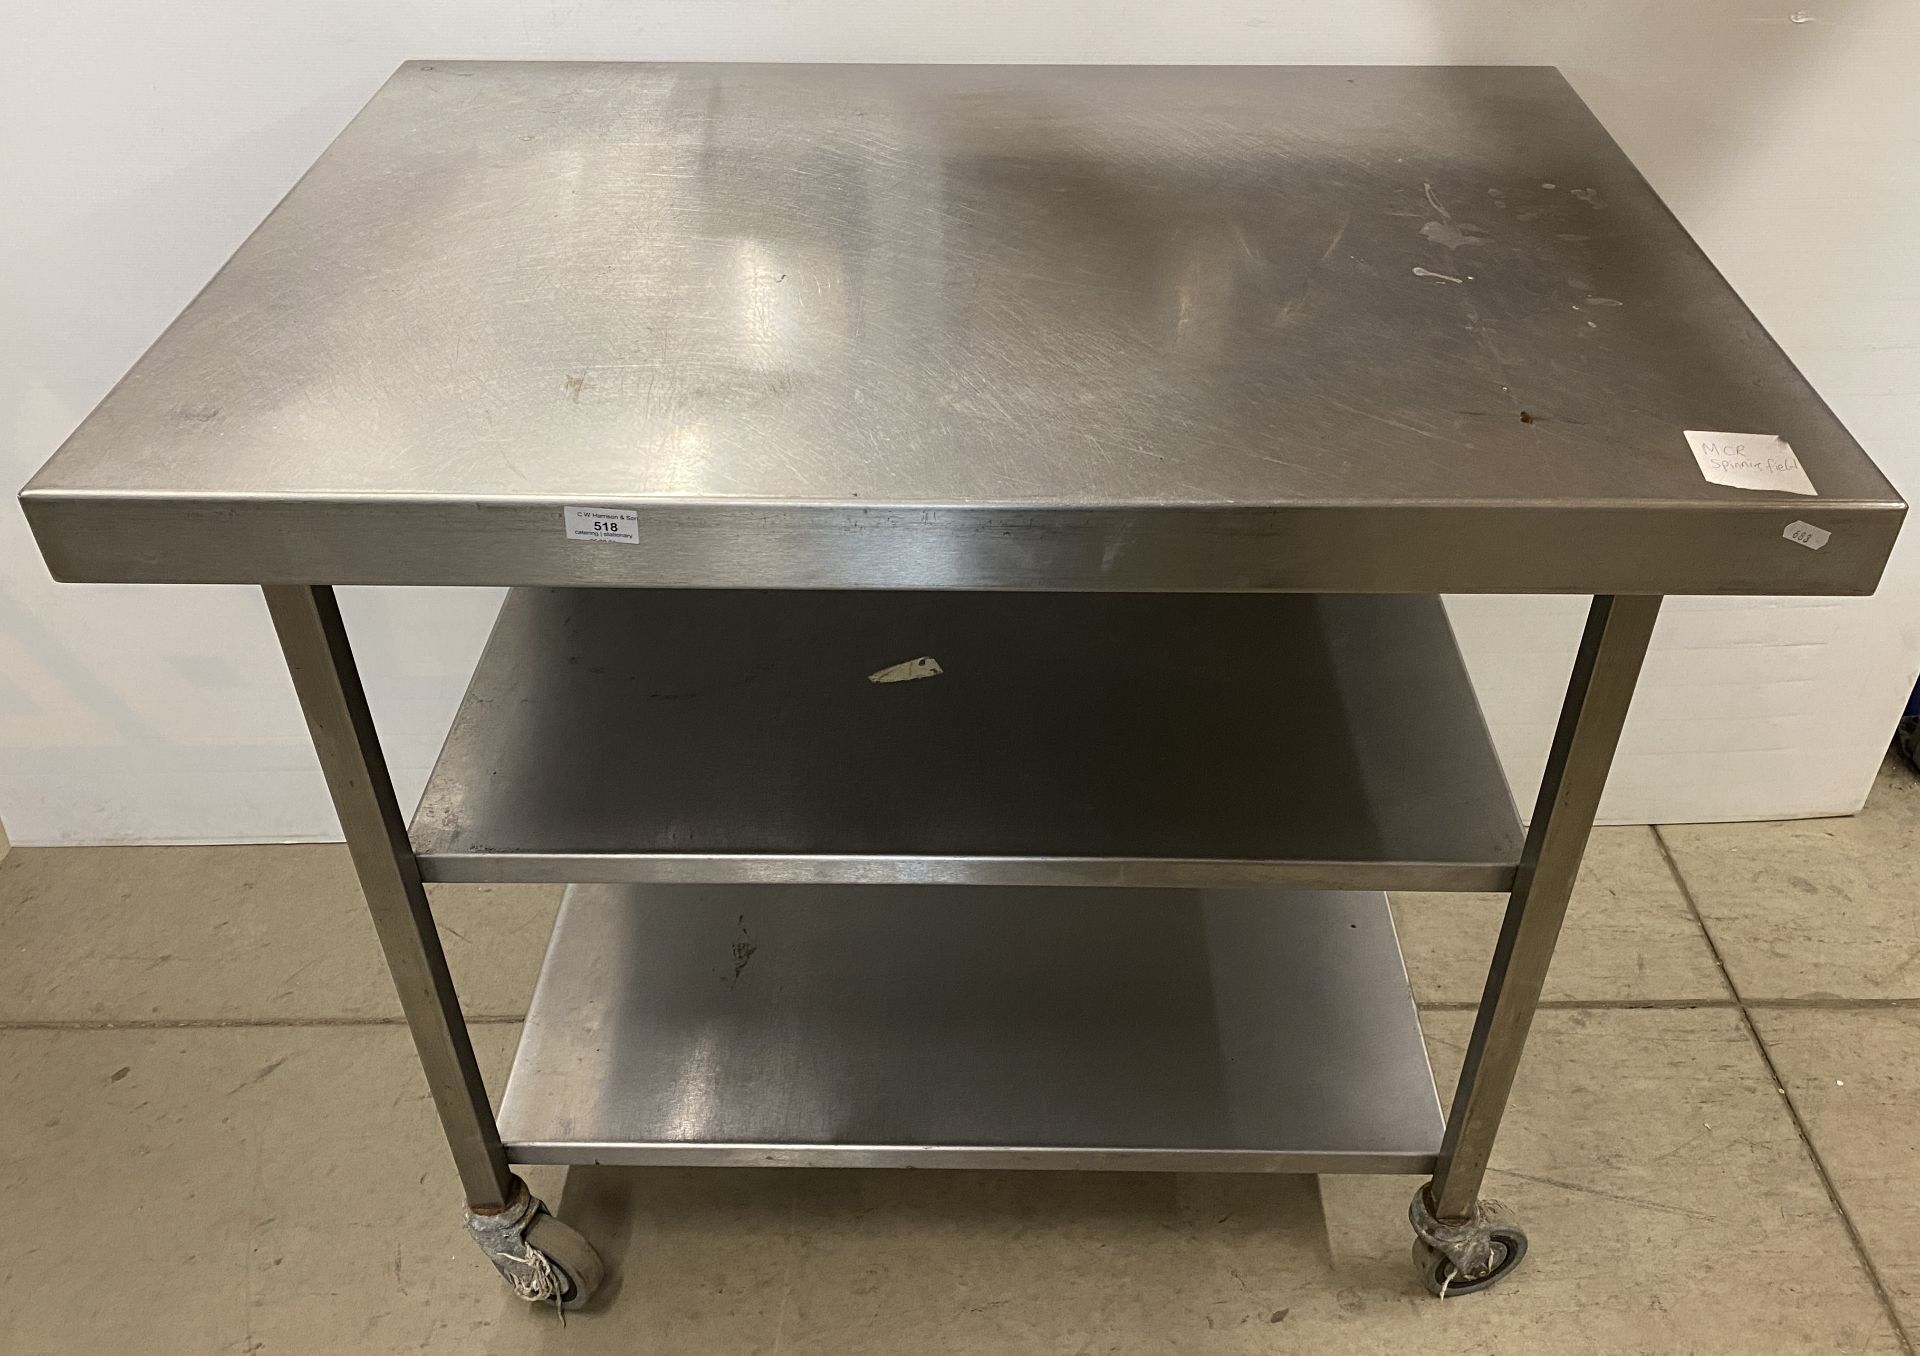 3 items - stainless steel mobile preparation table,